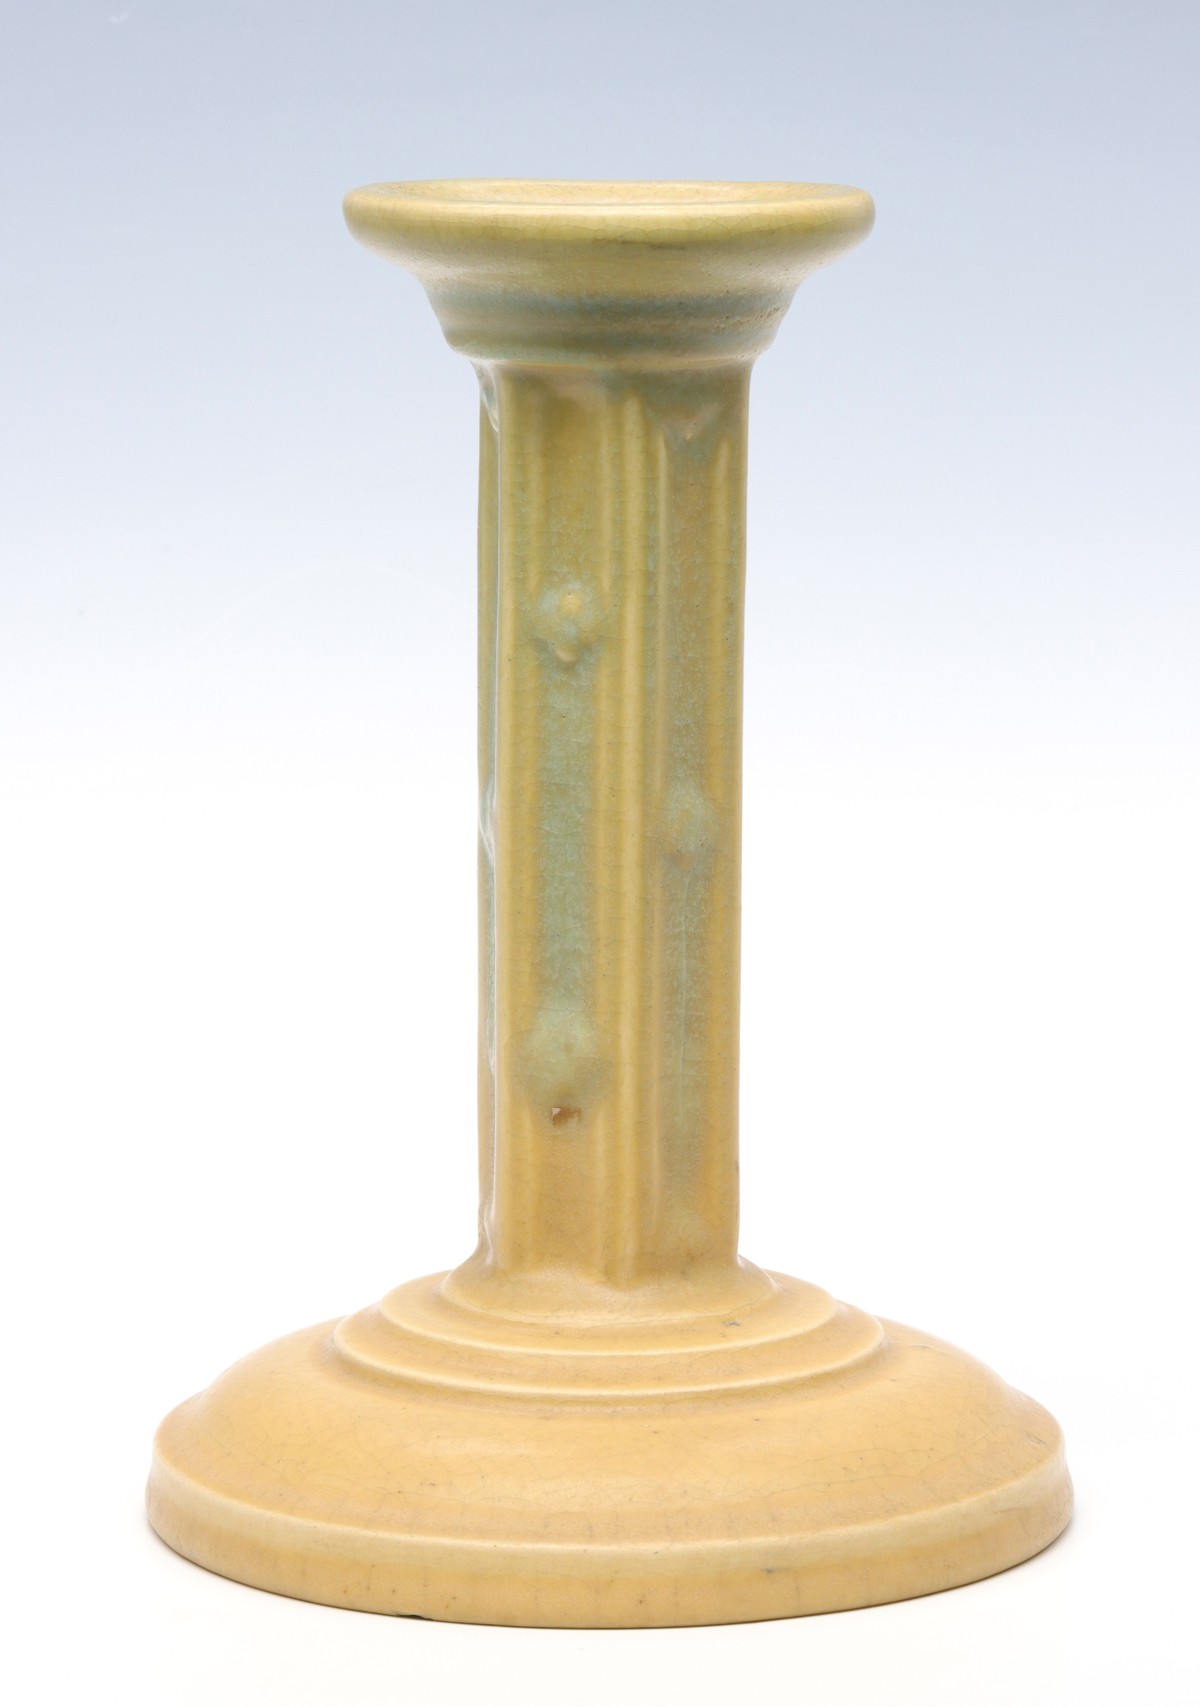 A ROOKWOOD ART POTTERY CANDLESTICK DATED 1915